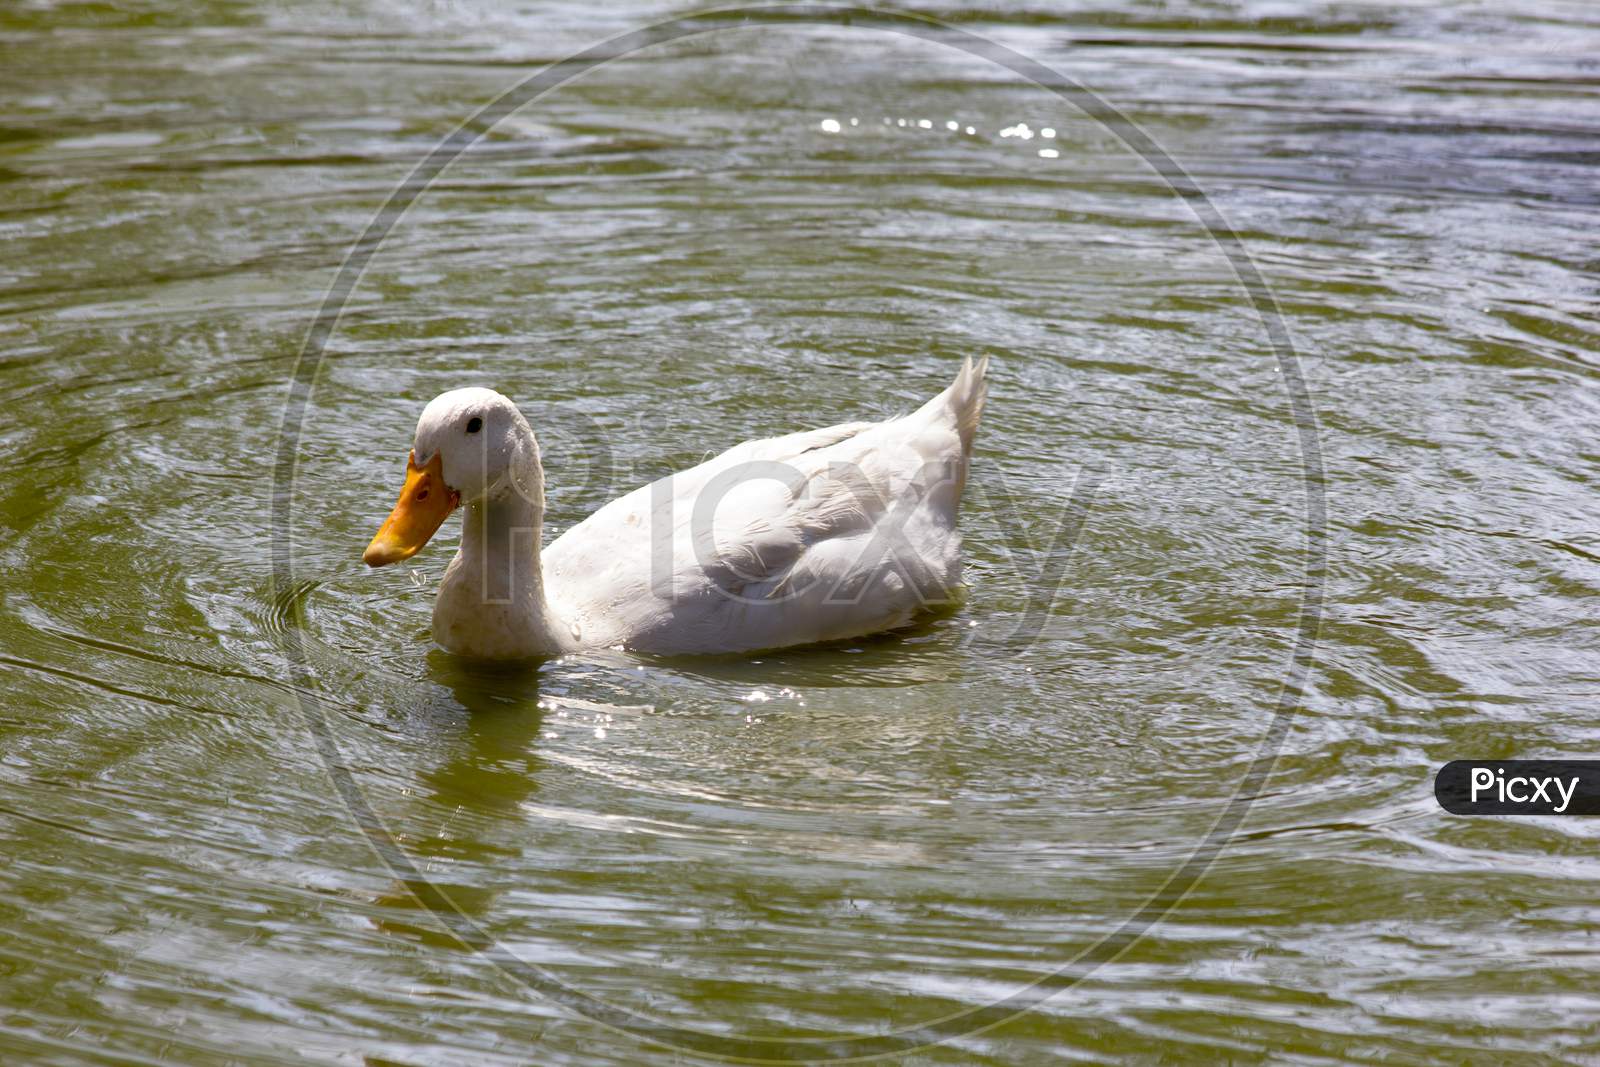 A Duck in a Water Pond